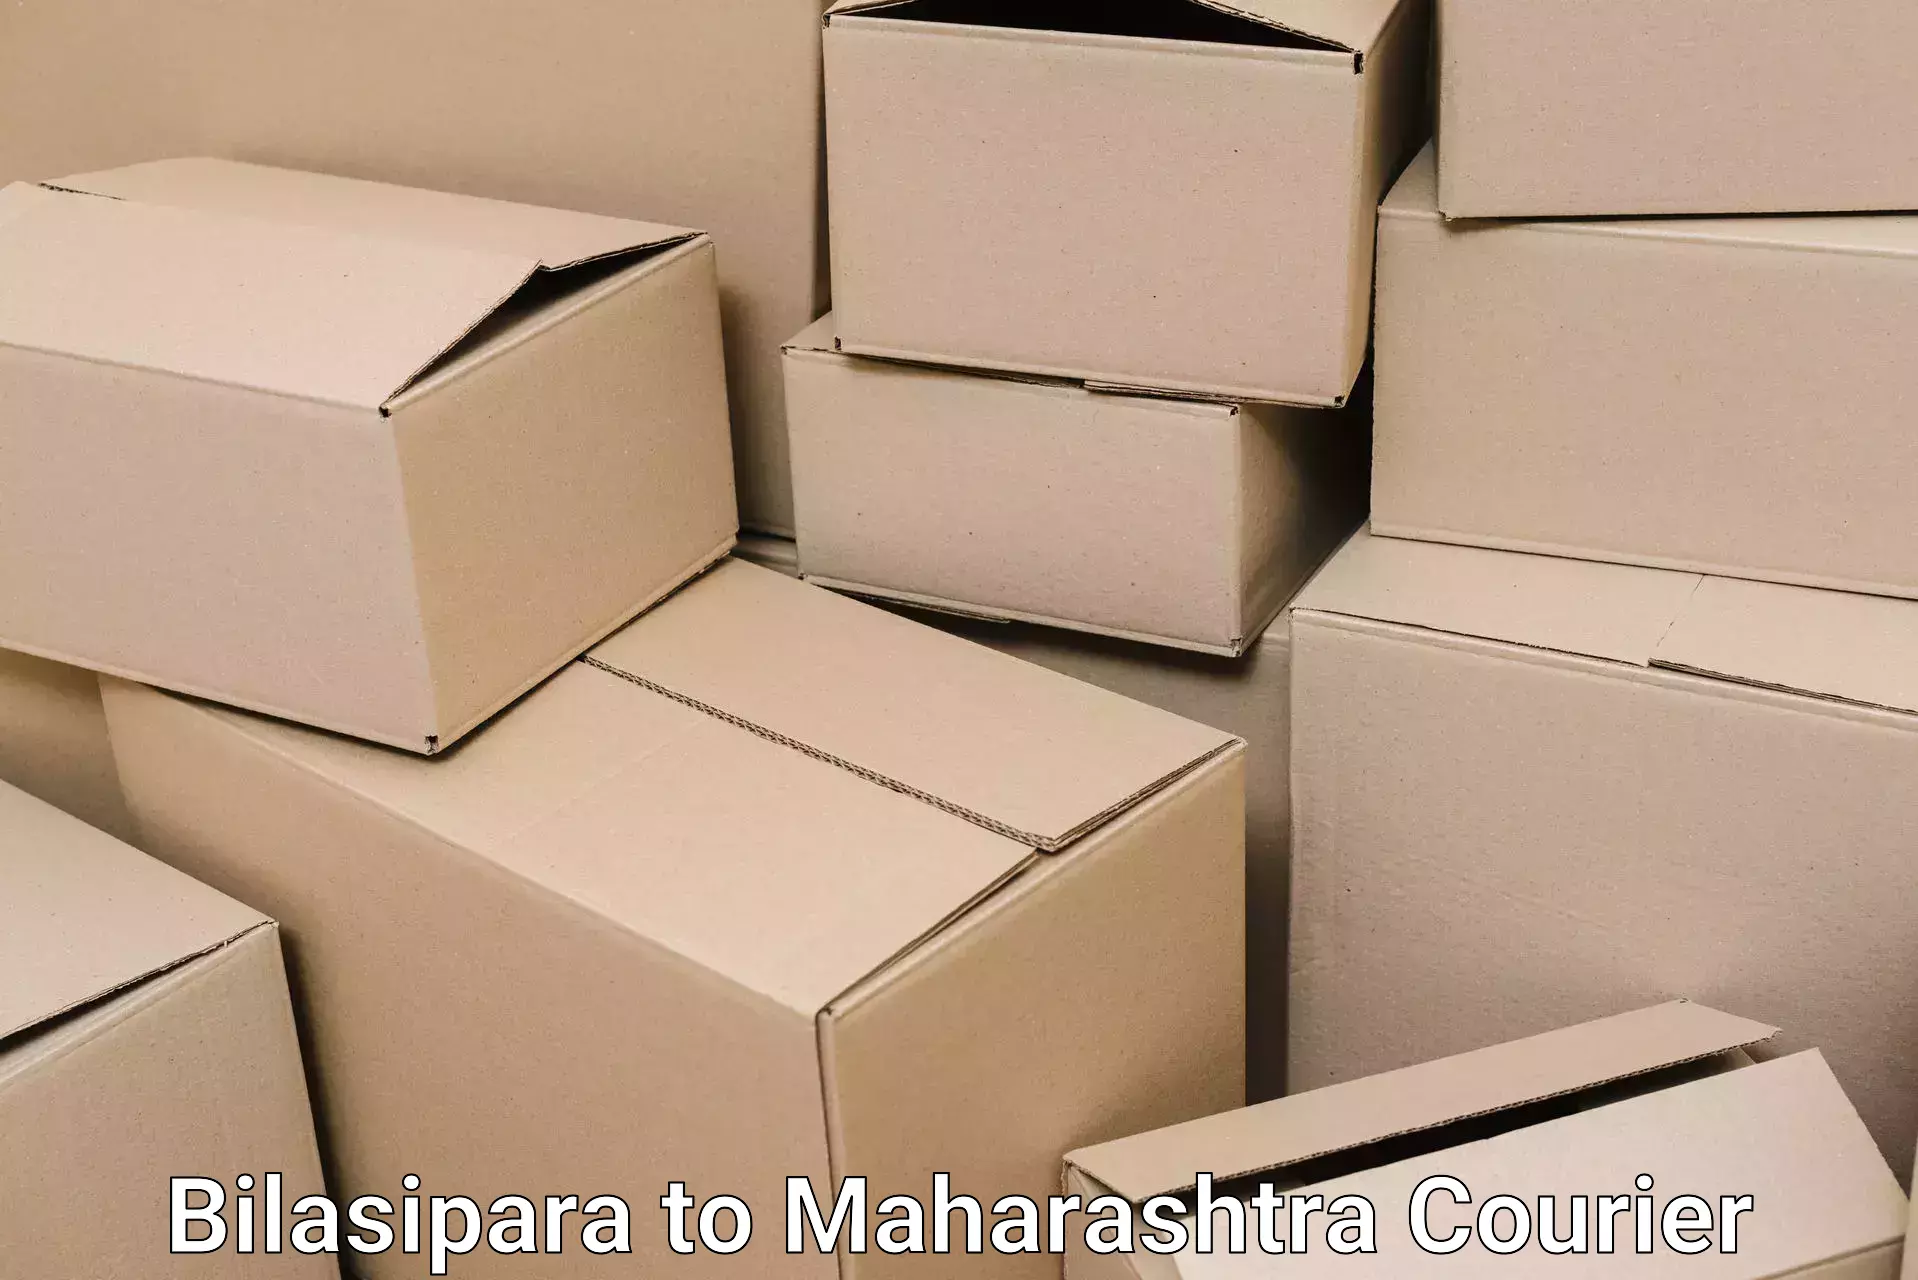 Quick relocation services in Bilasipara to Nagpur